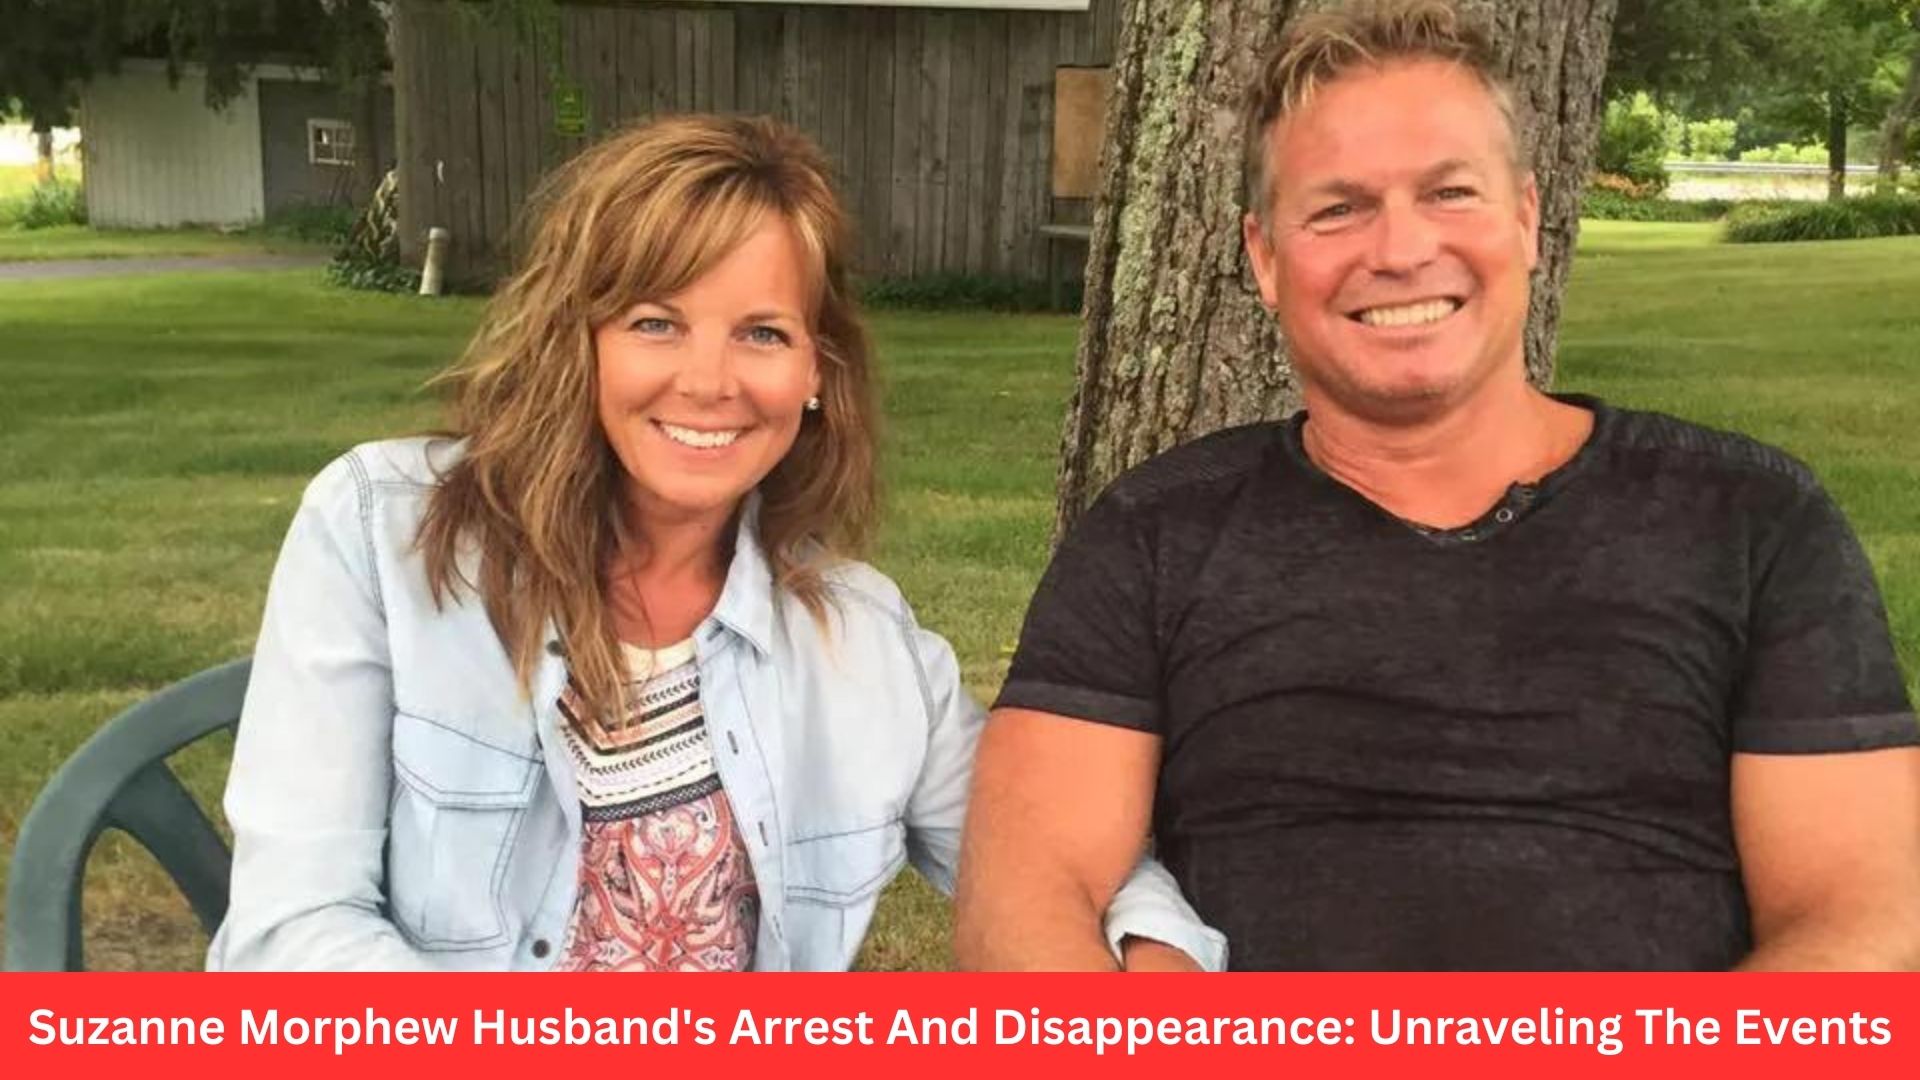 Suzanne Morphew Husband's Arrest And Disappearance: Unraveling The Events